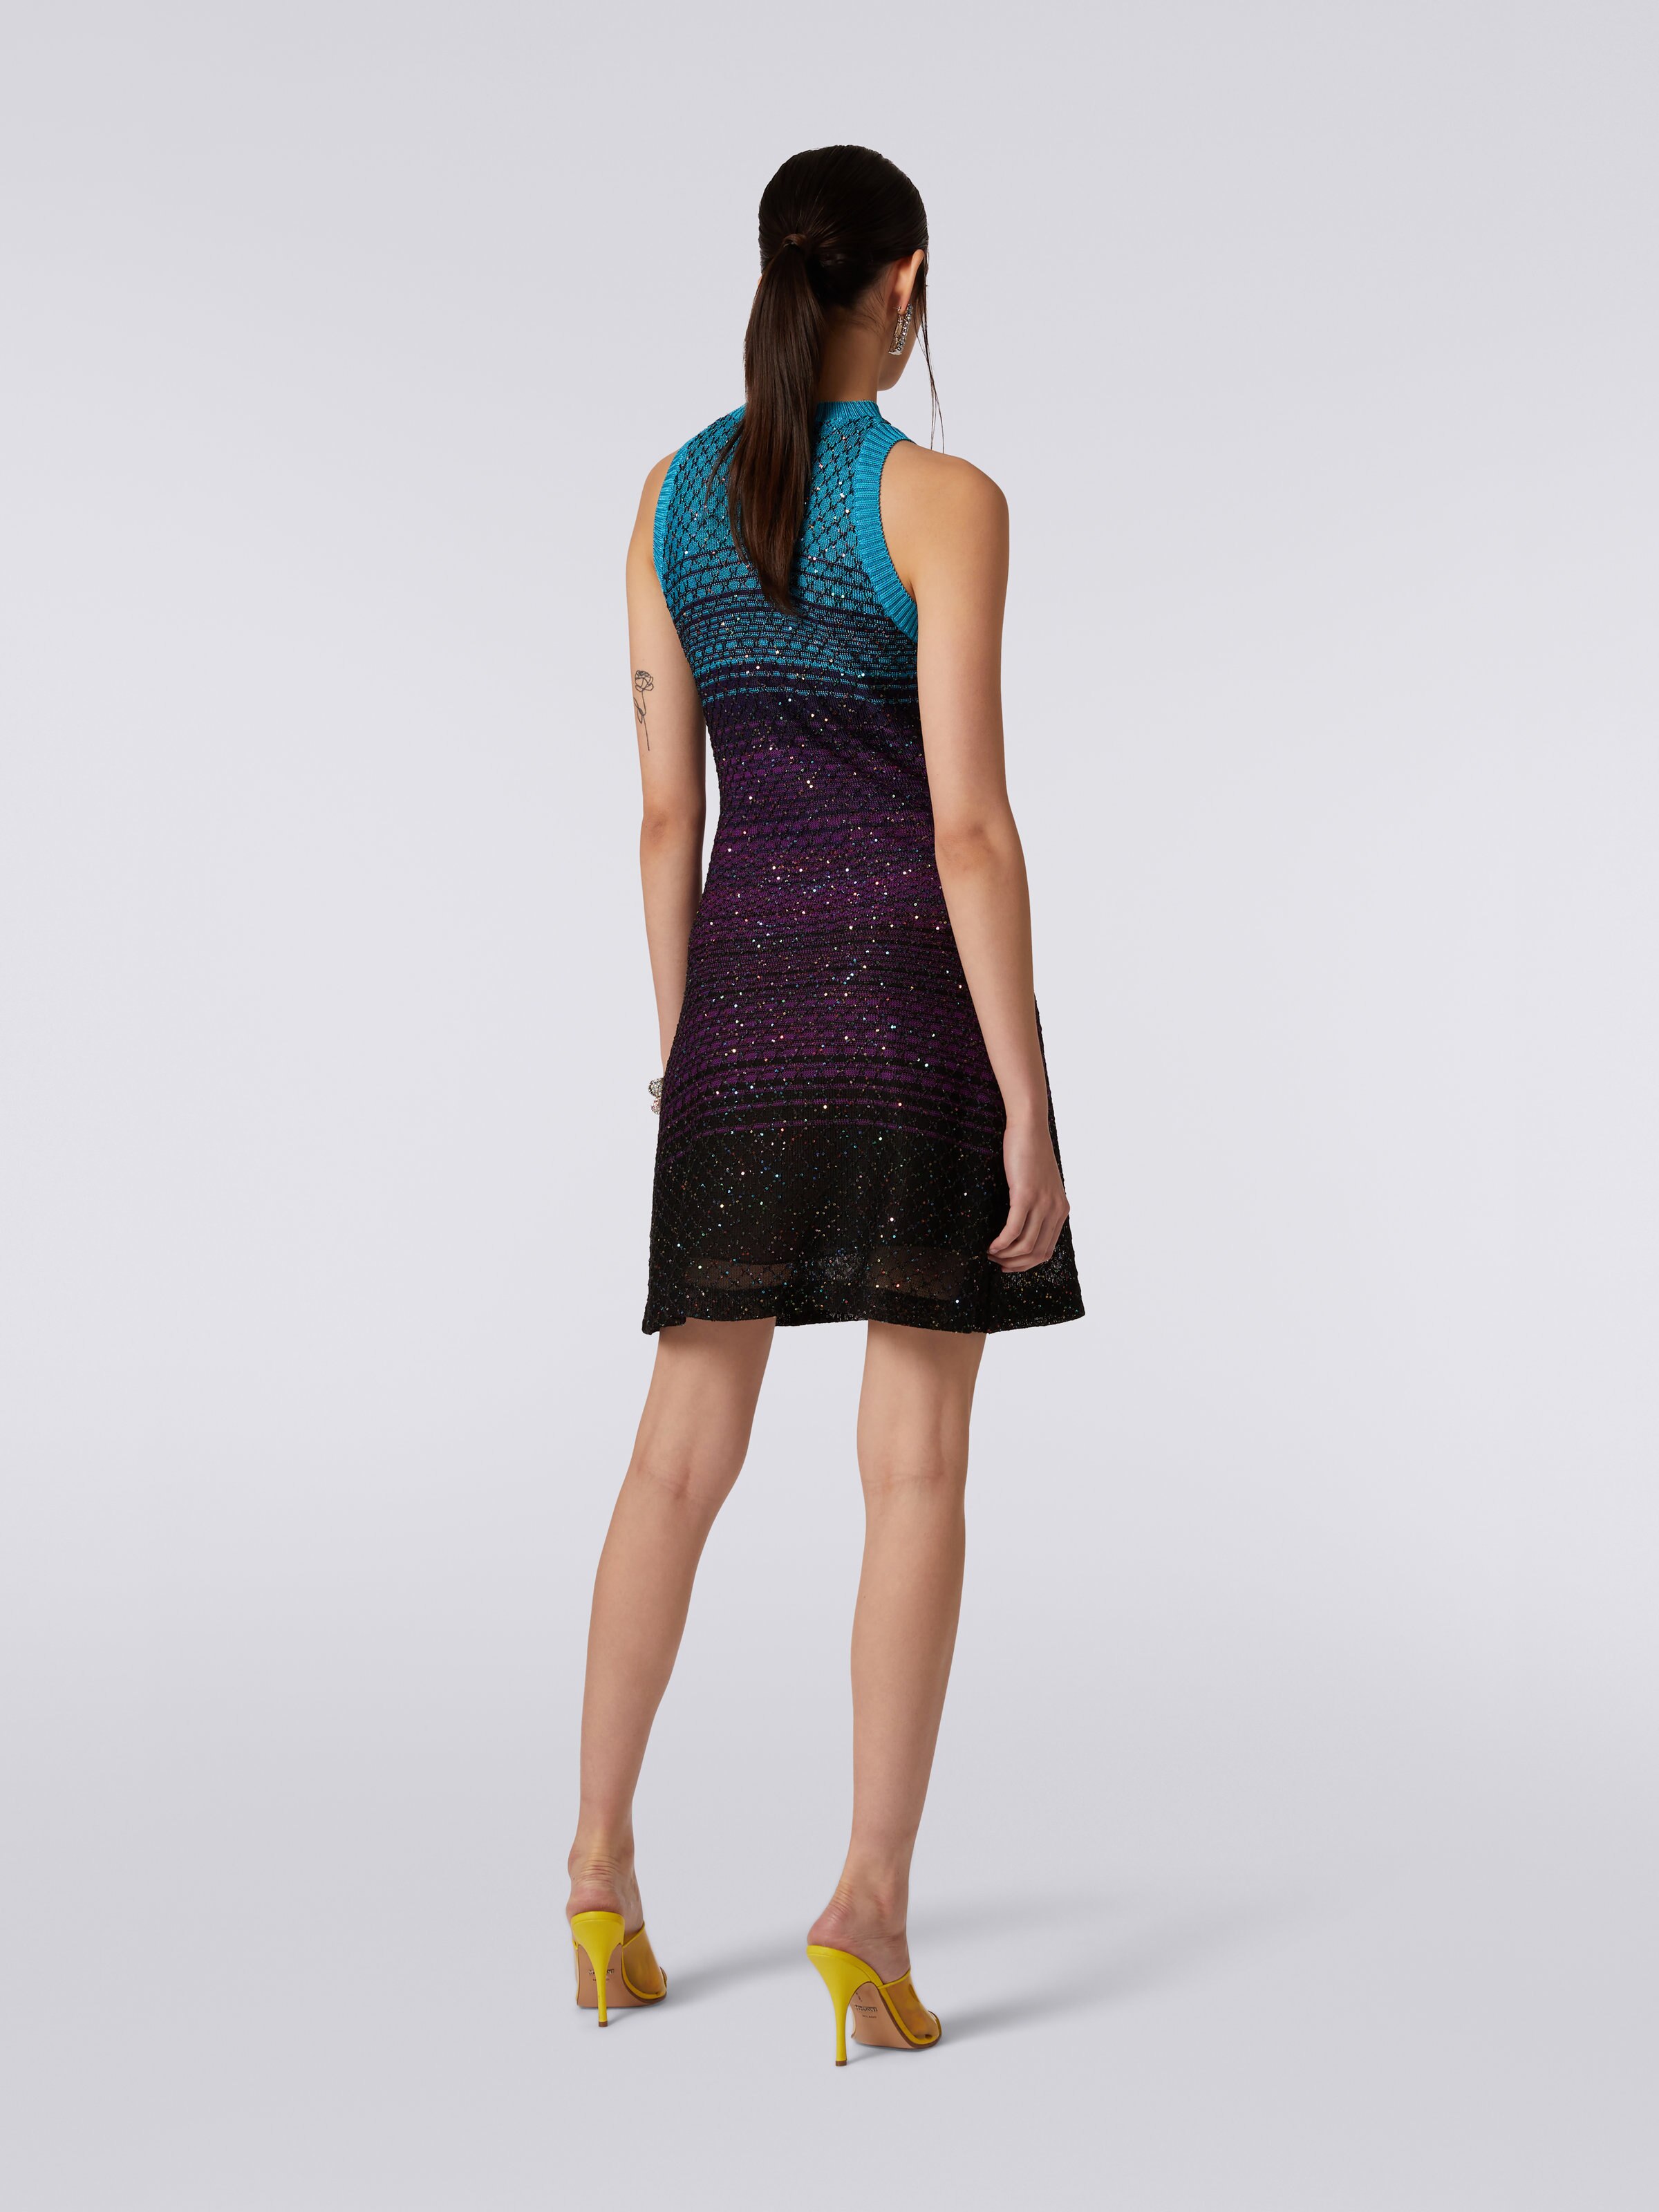 Sleeveless mesh dress with sequins, Turquoise, Purple & Black - 3